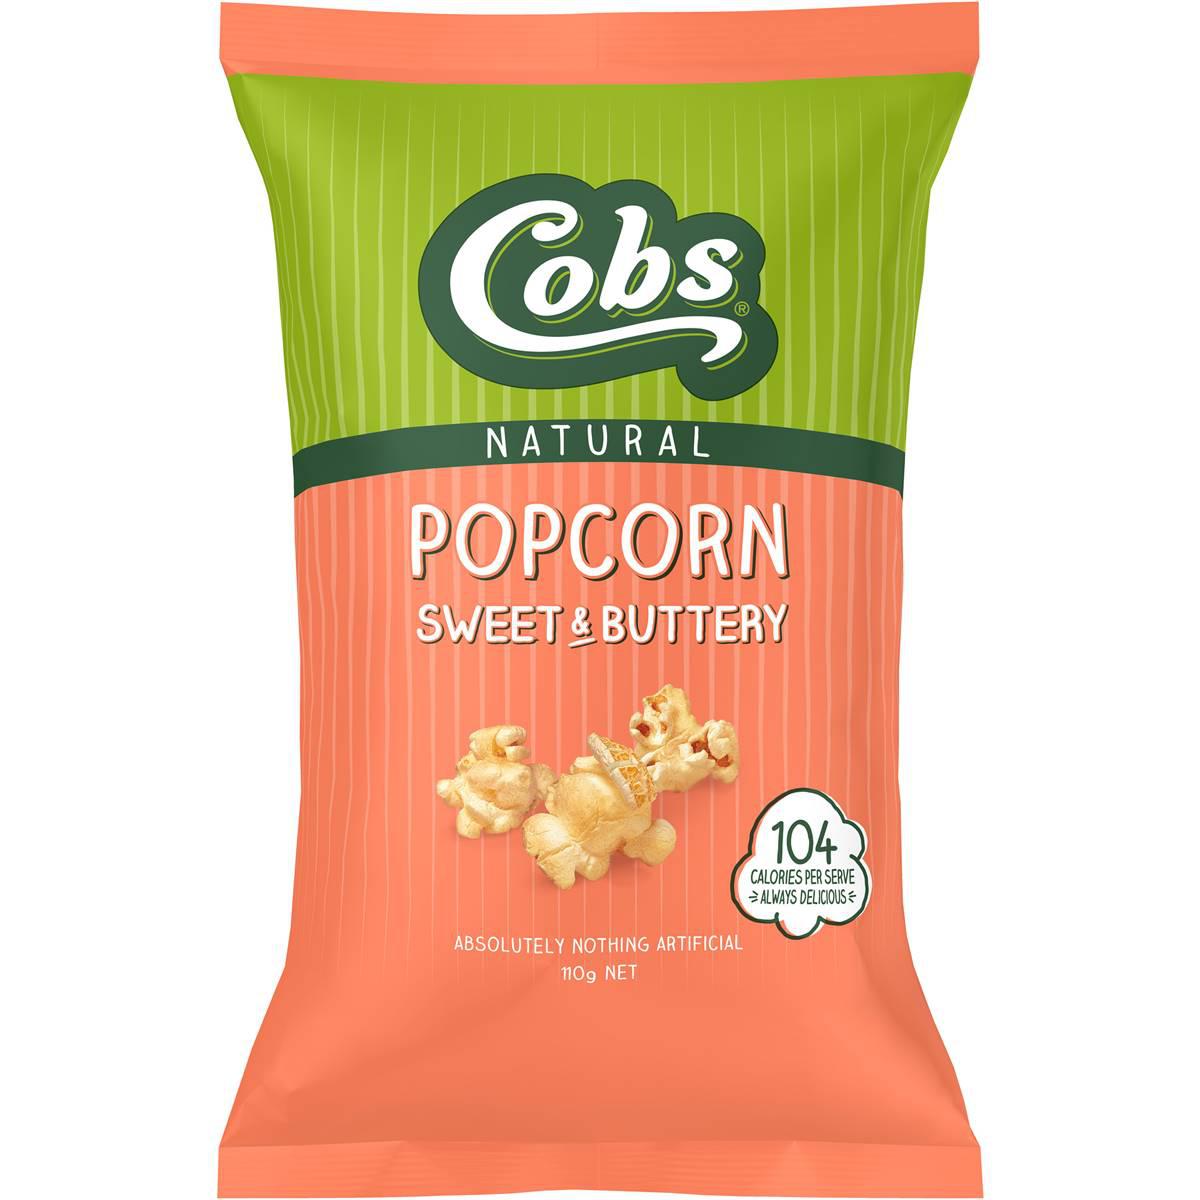 Cobs Natural Popcorn Sweet & Buttery 110g